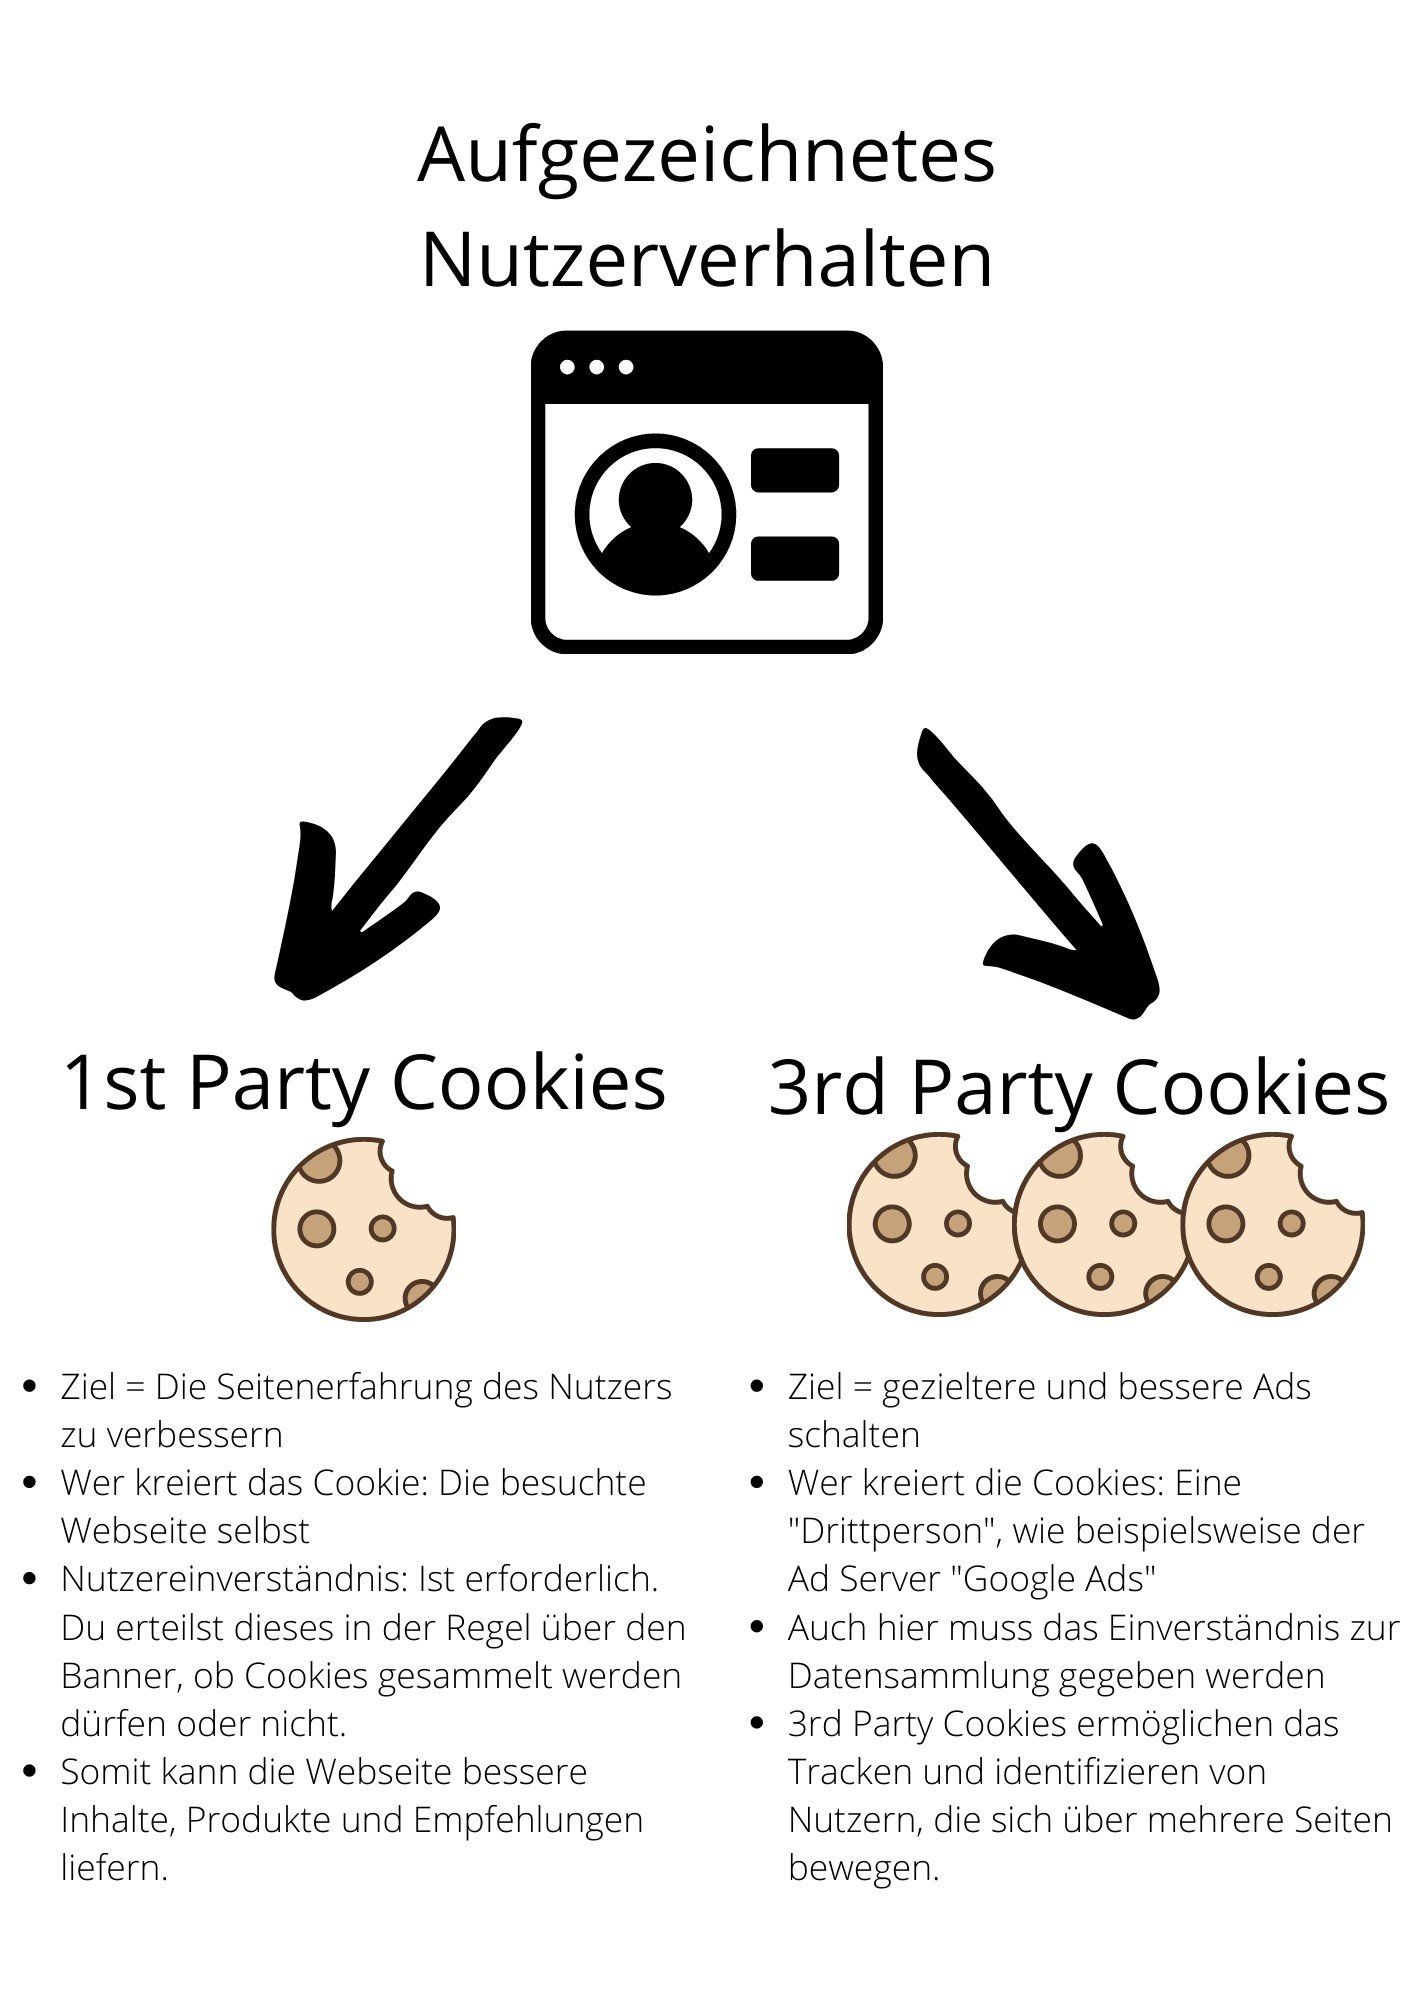 1st Party Cookies vs. 3rd Party Cookies